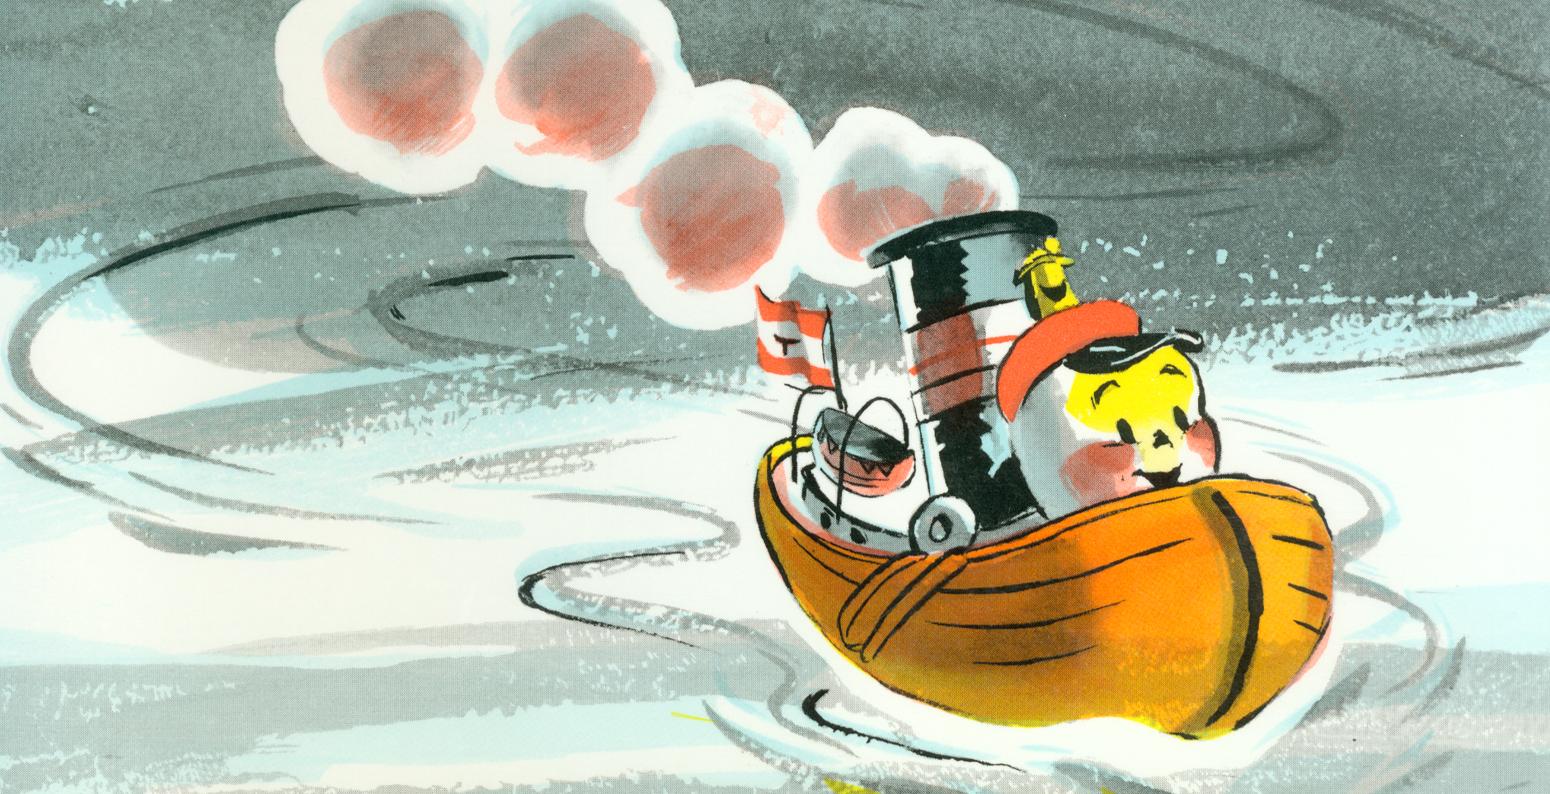 Cover illustration of Little Toot showing tug boat. 